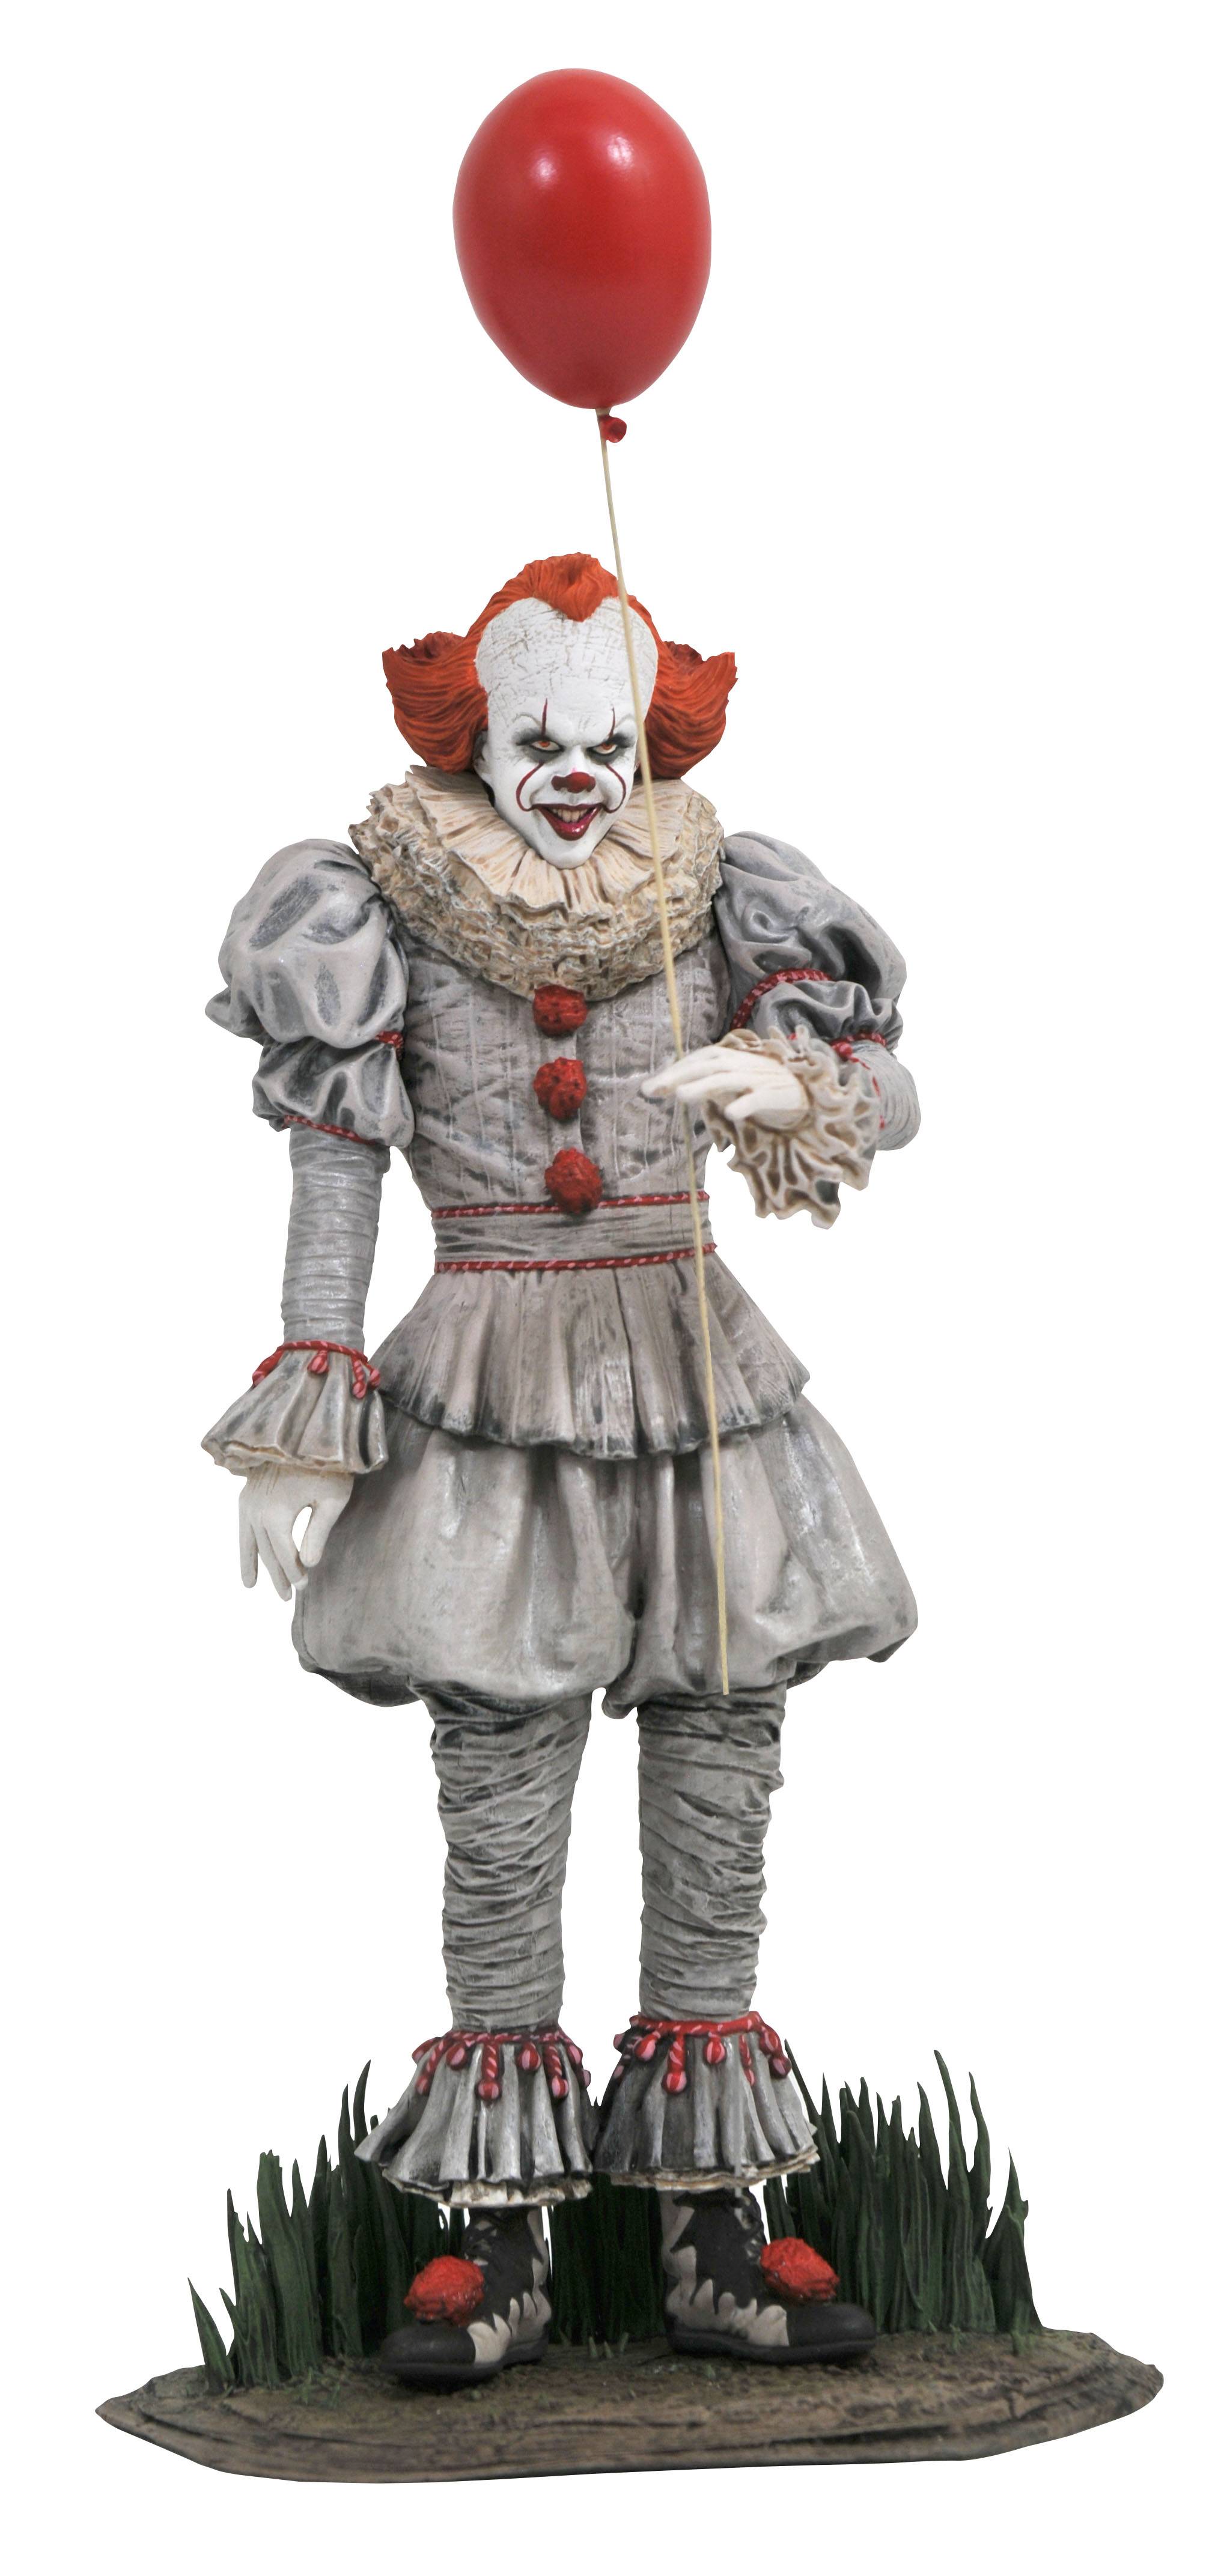 JUN192381 - IT CHAPTER 2 GALLERY PENNYWISE PVC FIGURE - Previews World